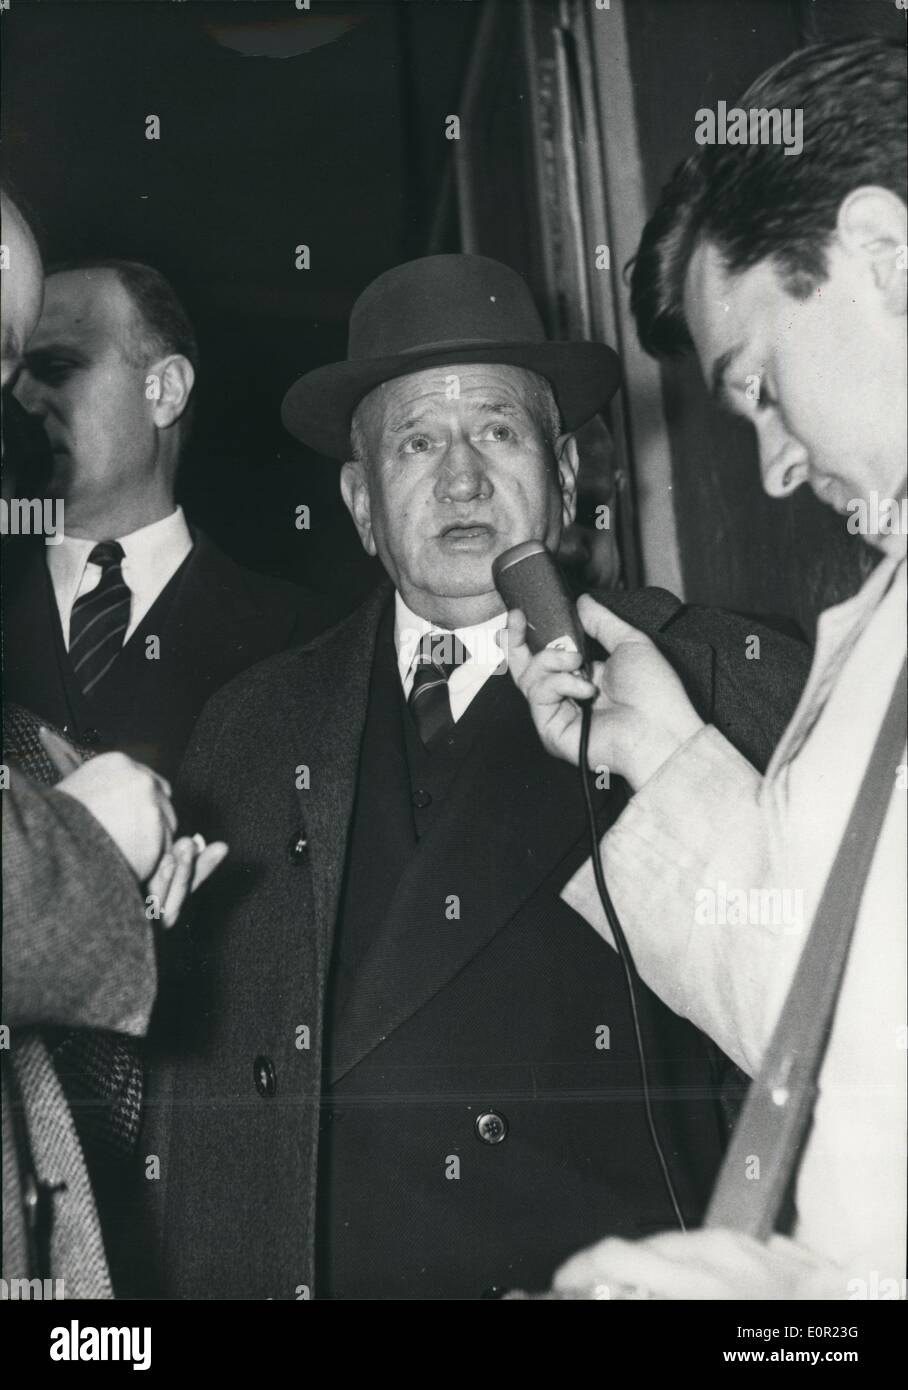 Oct. 10, 1957 - Cabinet Crisis: Photo shows M. Edouard Daladier leaving the ministry of Public works where M. Rene Pleven is carrying in his political Negotiations endeavoring to find a workable majority enabling him to form a new Government. Stock Photo